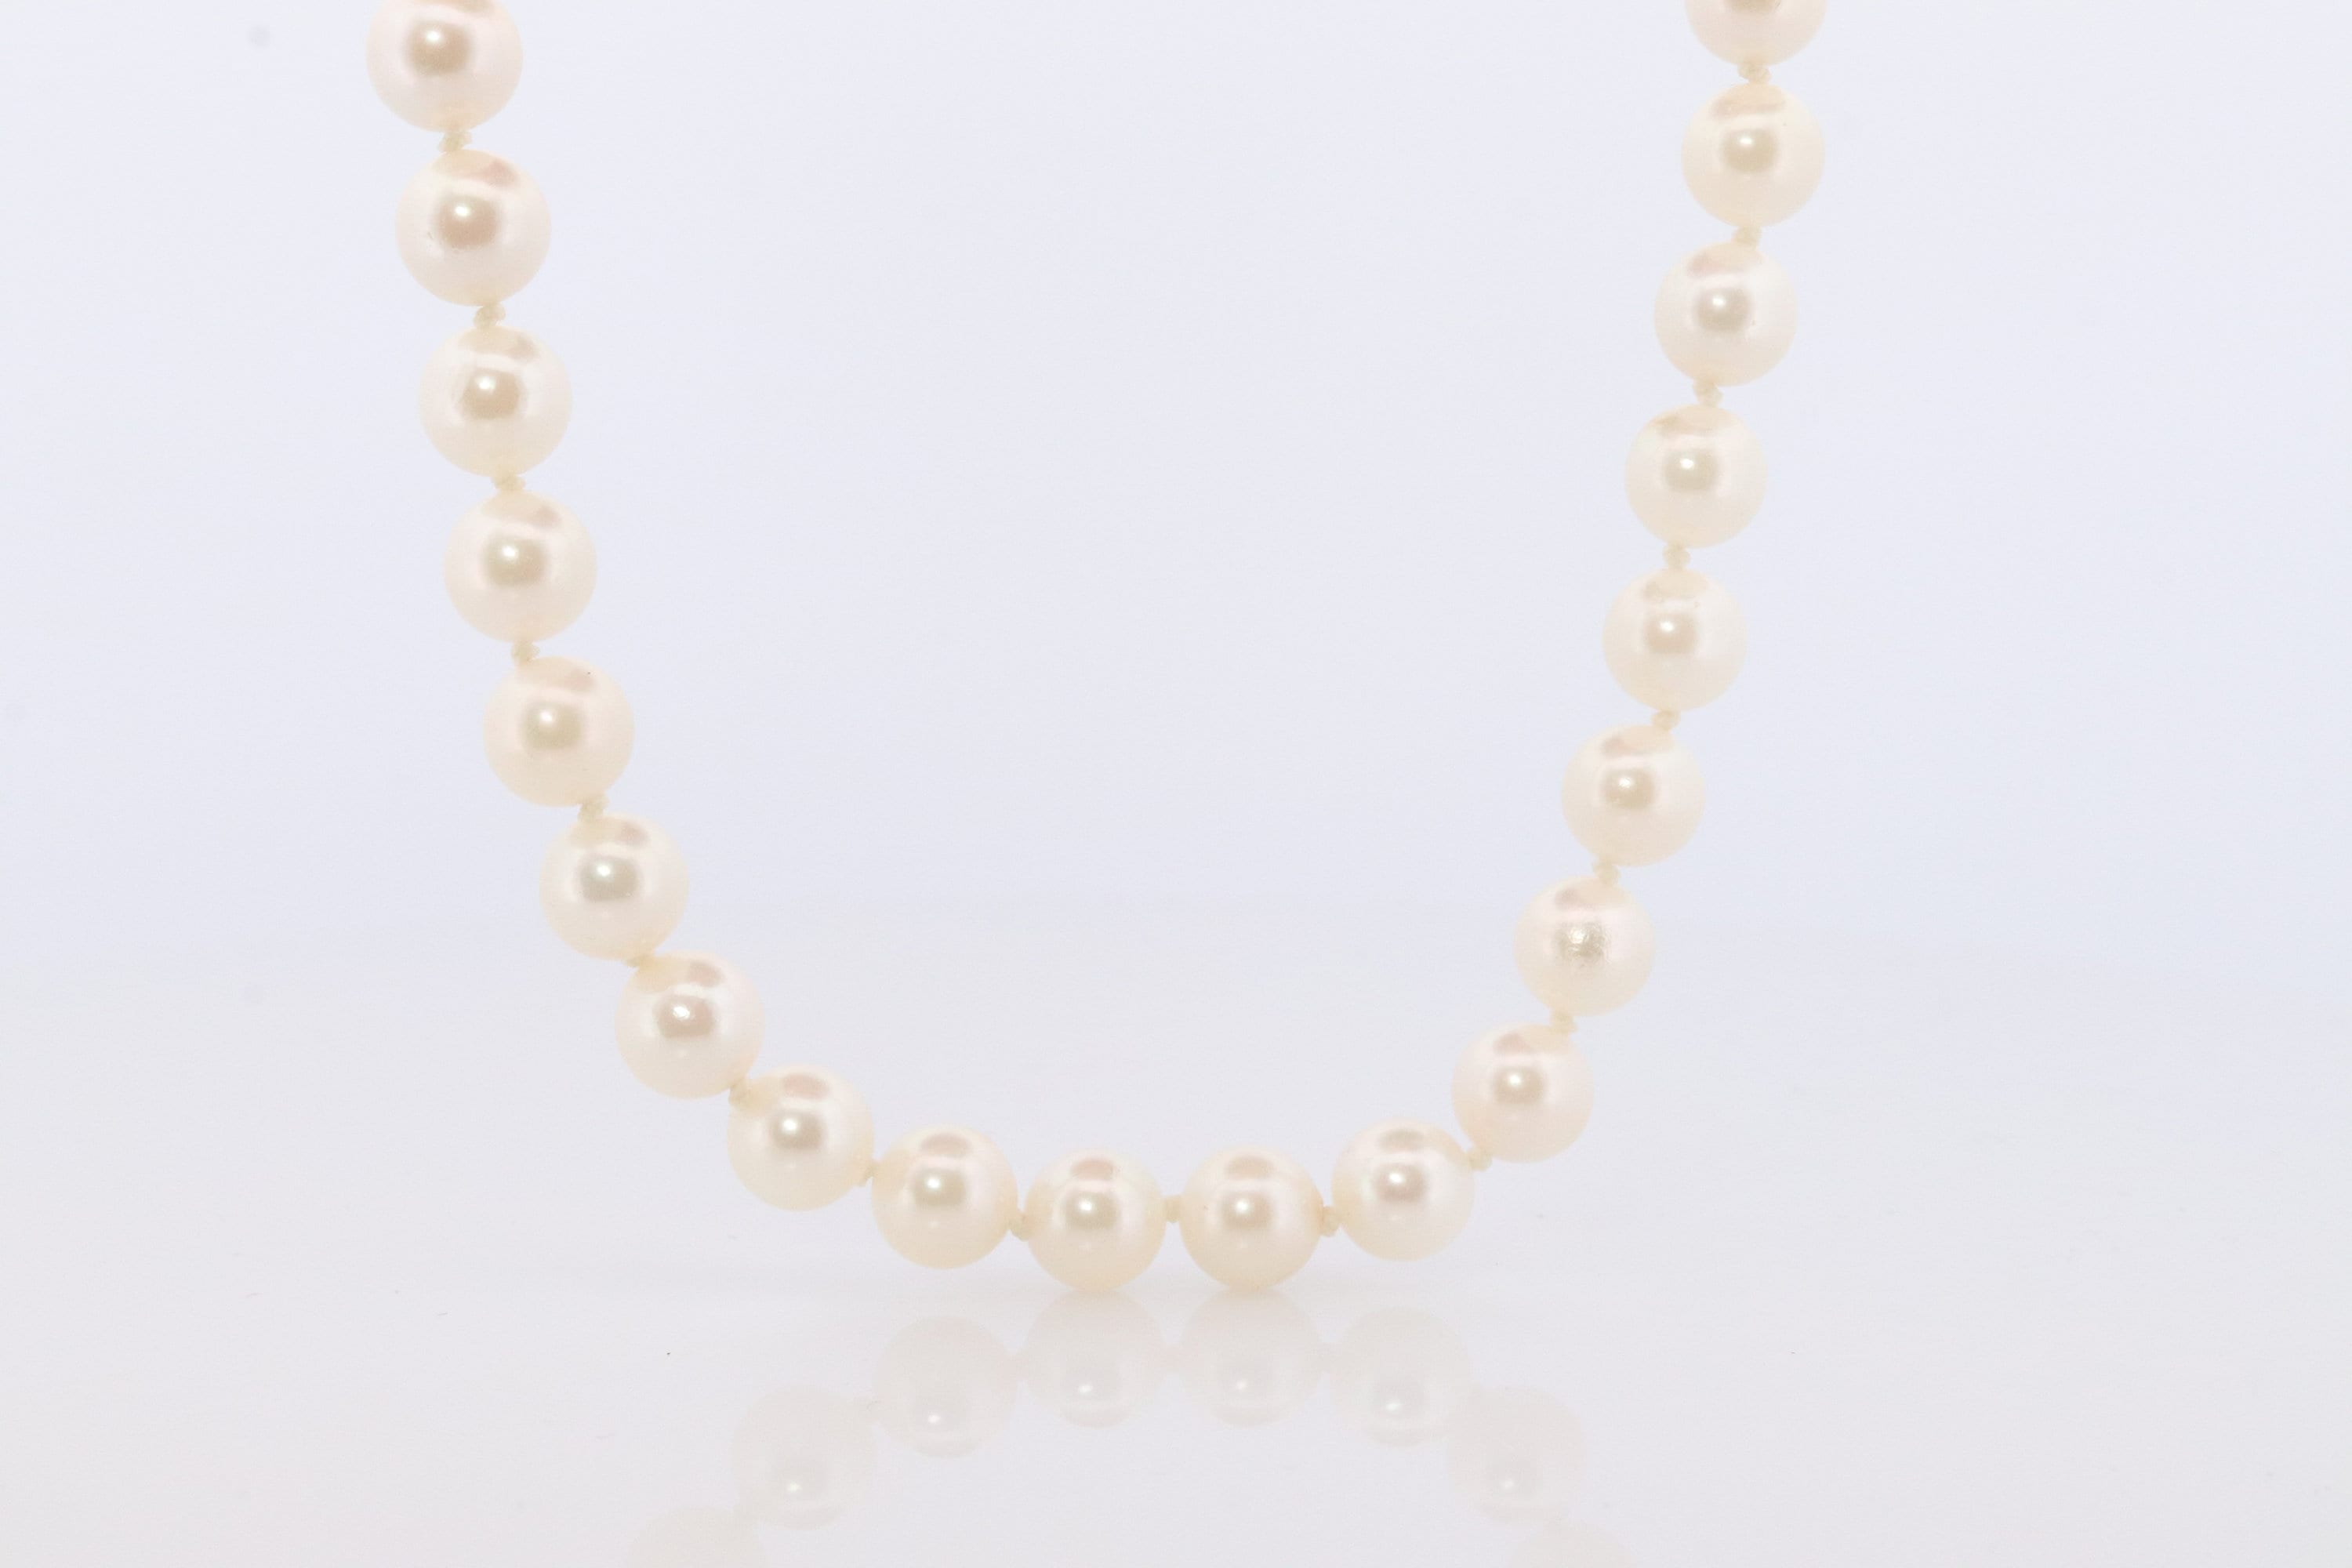 14k Akoya Pearl Necklace. 18in length 7mm AKOYA pearls with beautiful lustre.